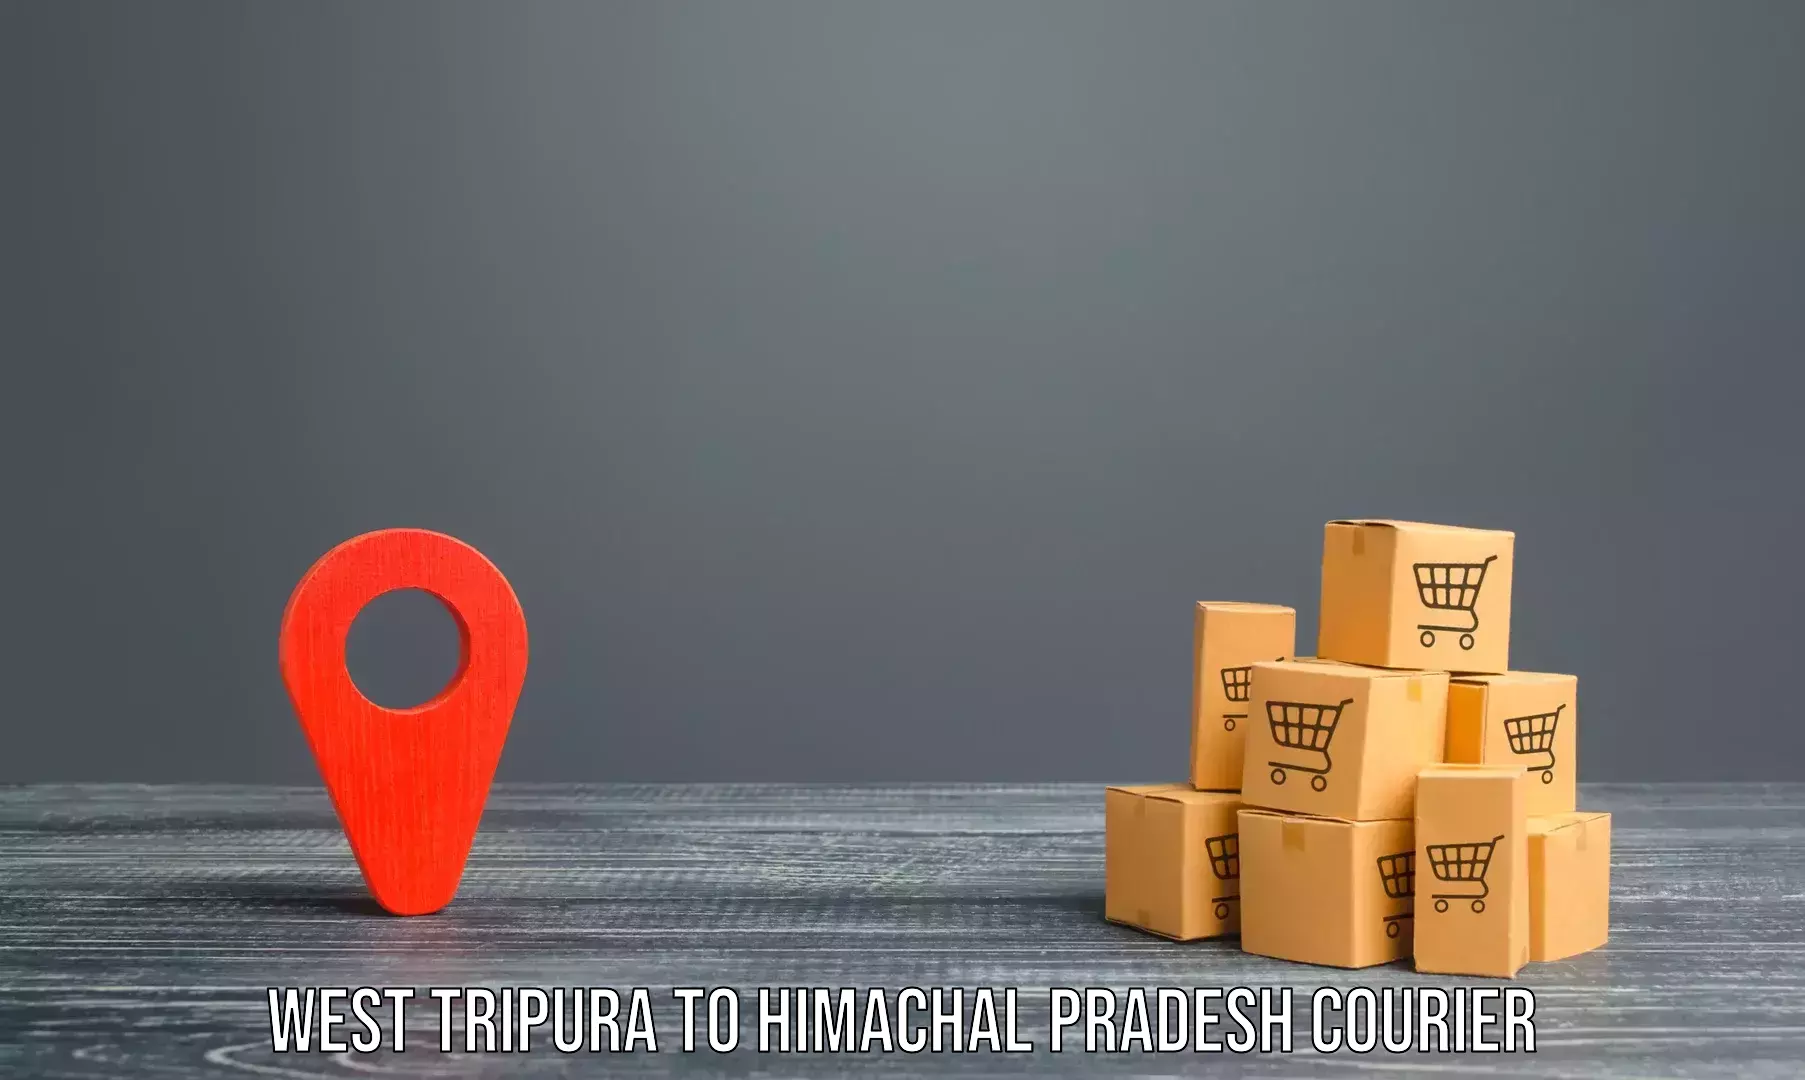 Furniture delivery service West Tripura to Haripurdhar